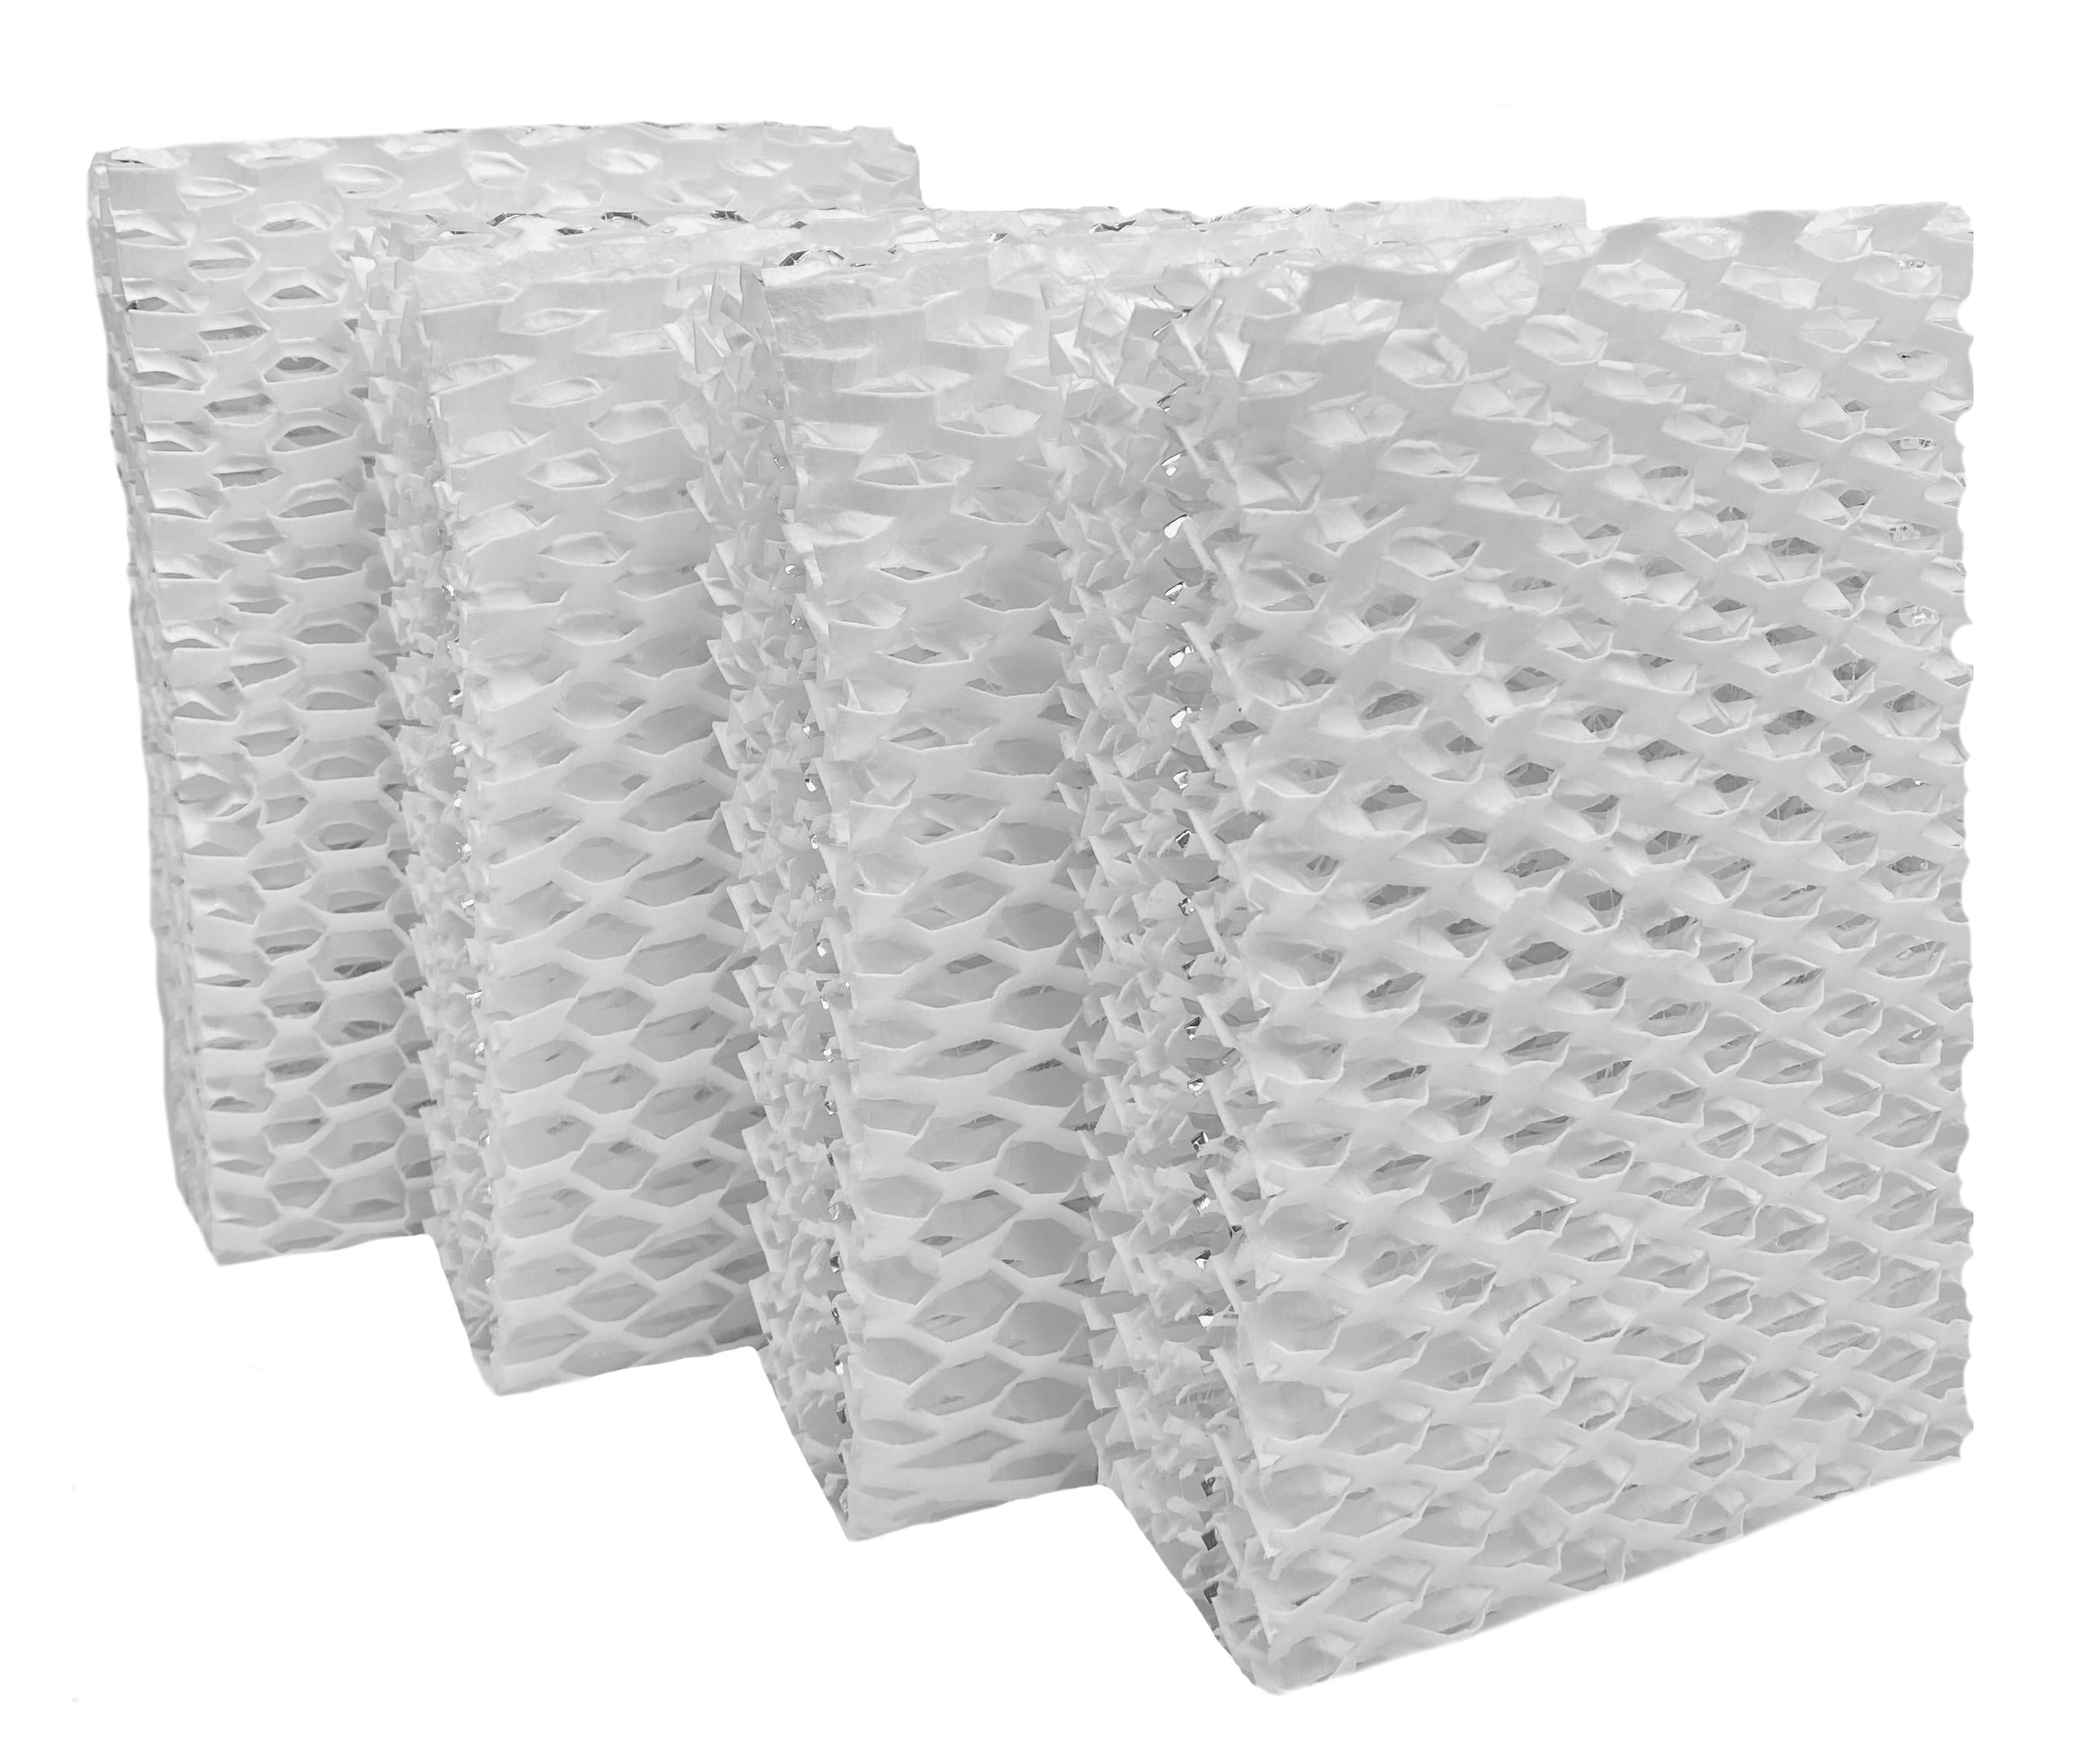 2 PACK COMPATIBLE PROCARE PCWF813 PCWF-813 HUMIDIFIER WICK FILTERS REPLACEMENT 